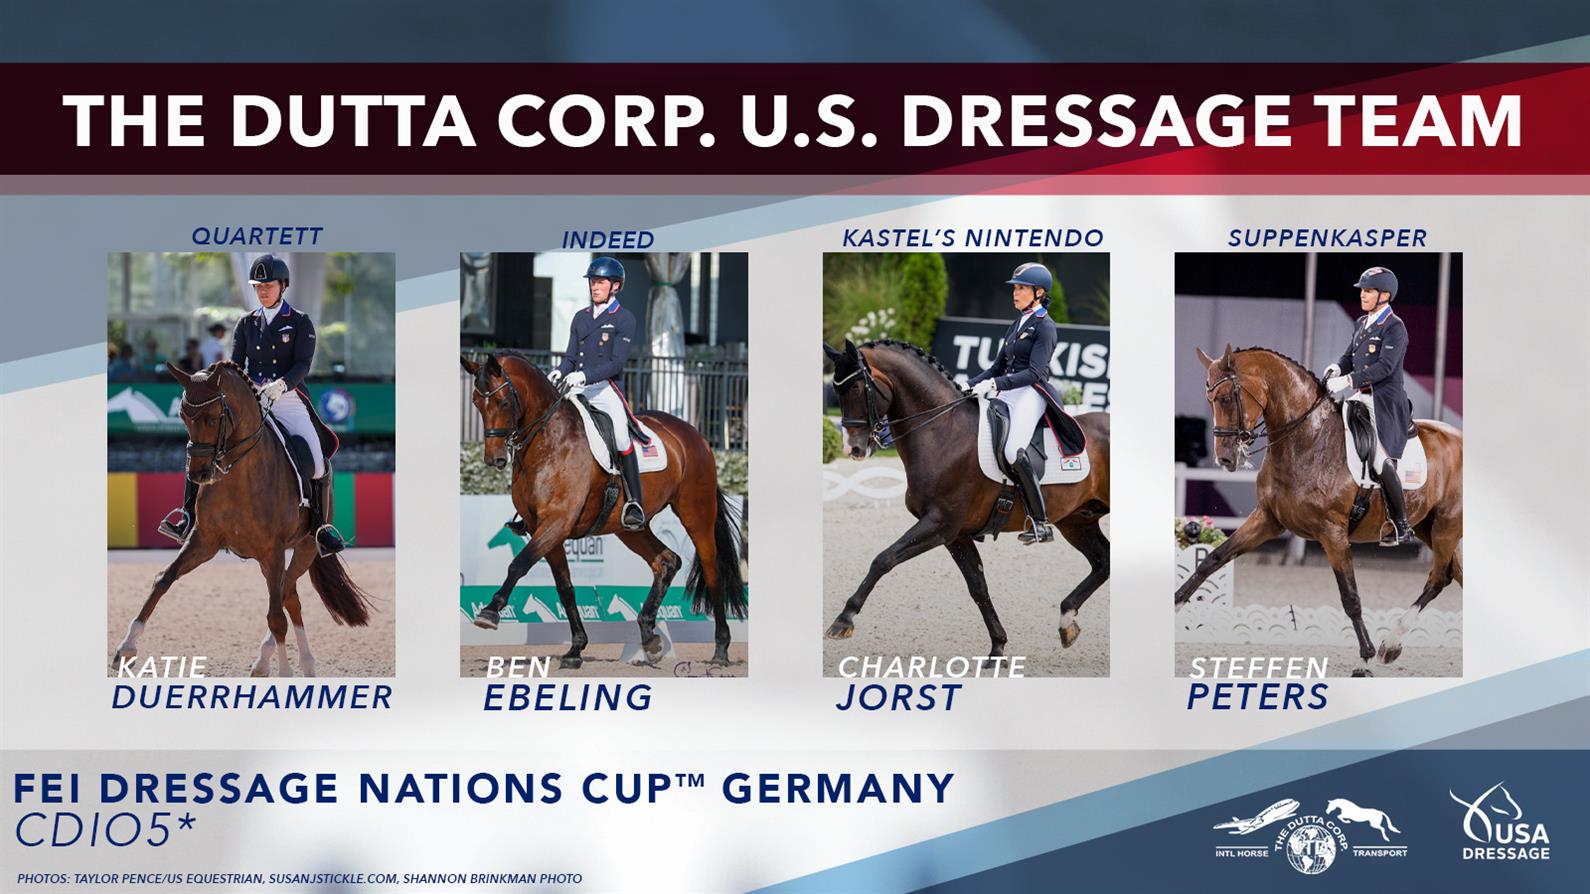 Team members for the 2022 FEI Dressage Nations Cup Germany